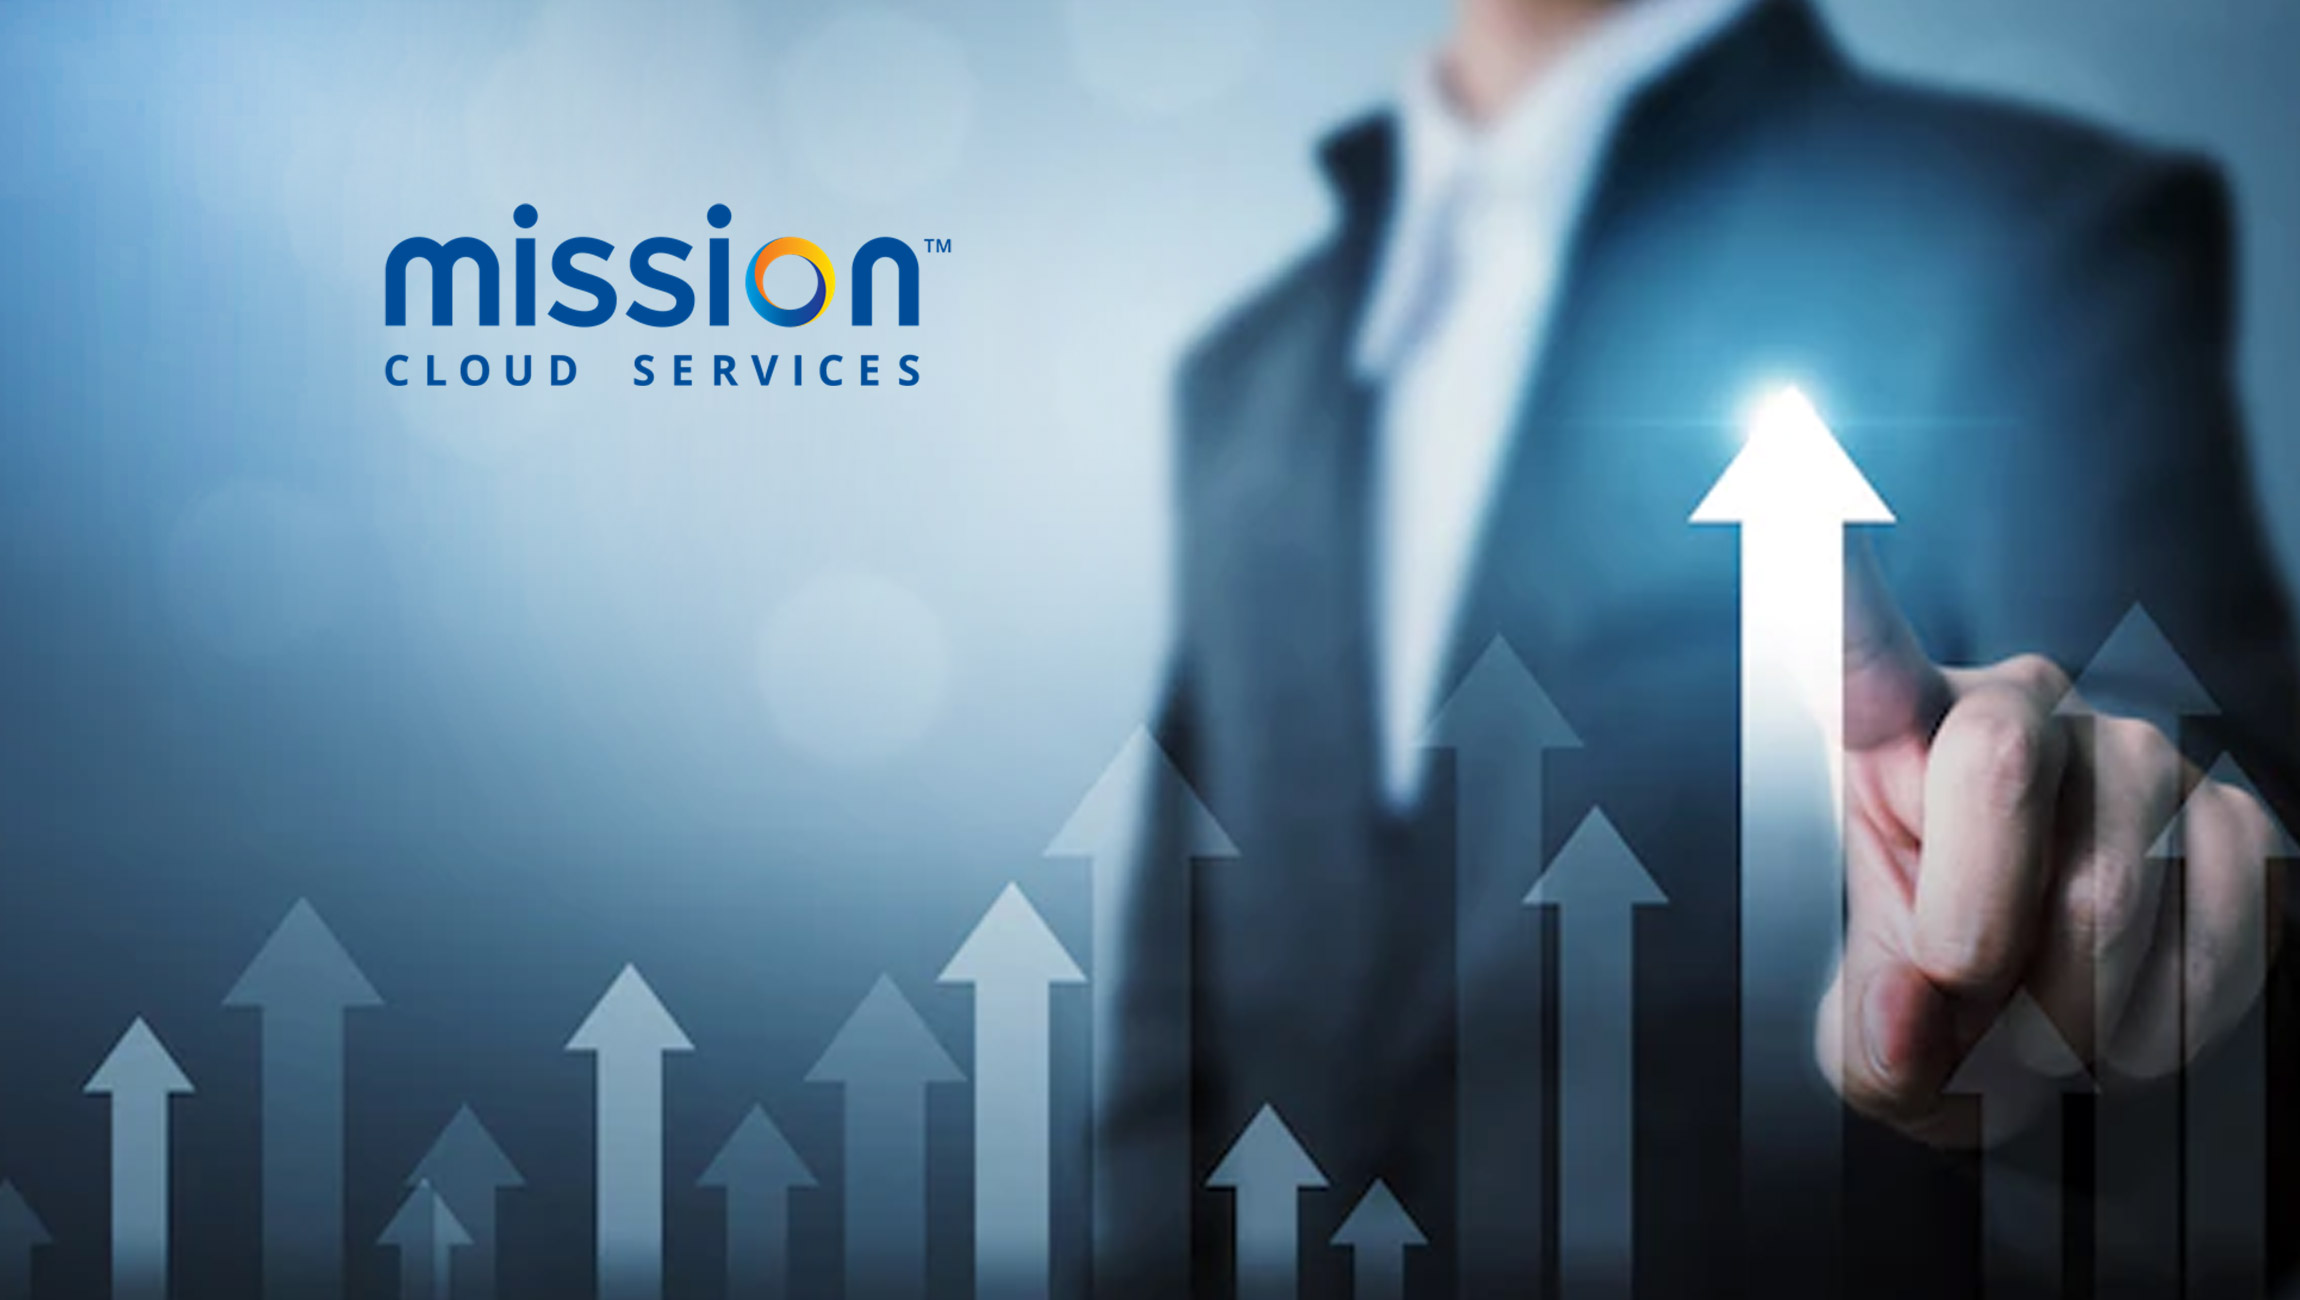 Mission Cloud Services Recognized as No. 7 on the 2022 CRN Fast Growth 150 List